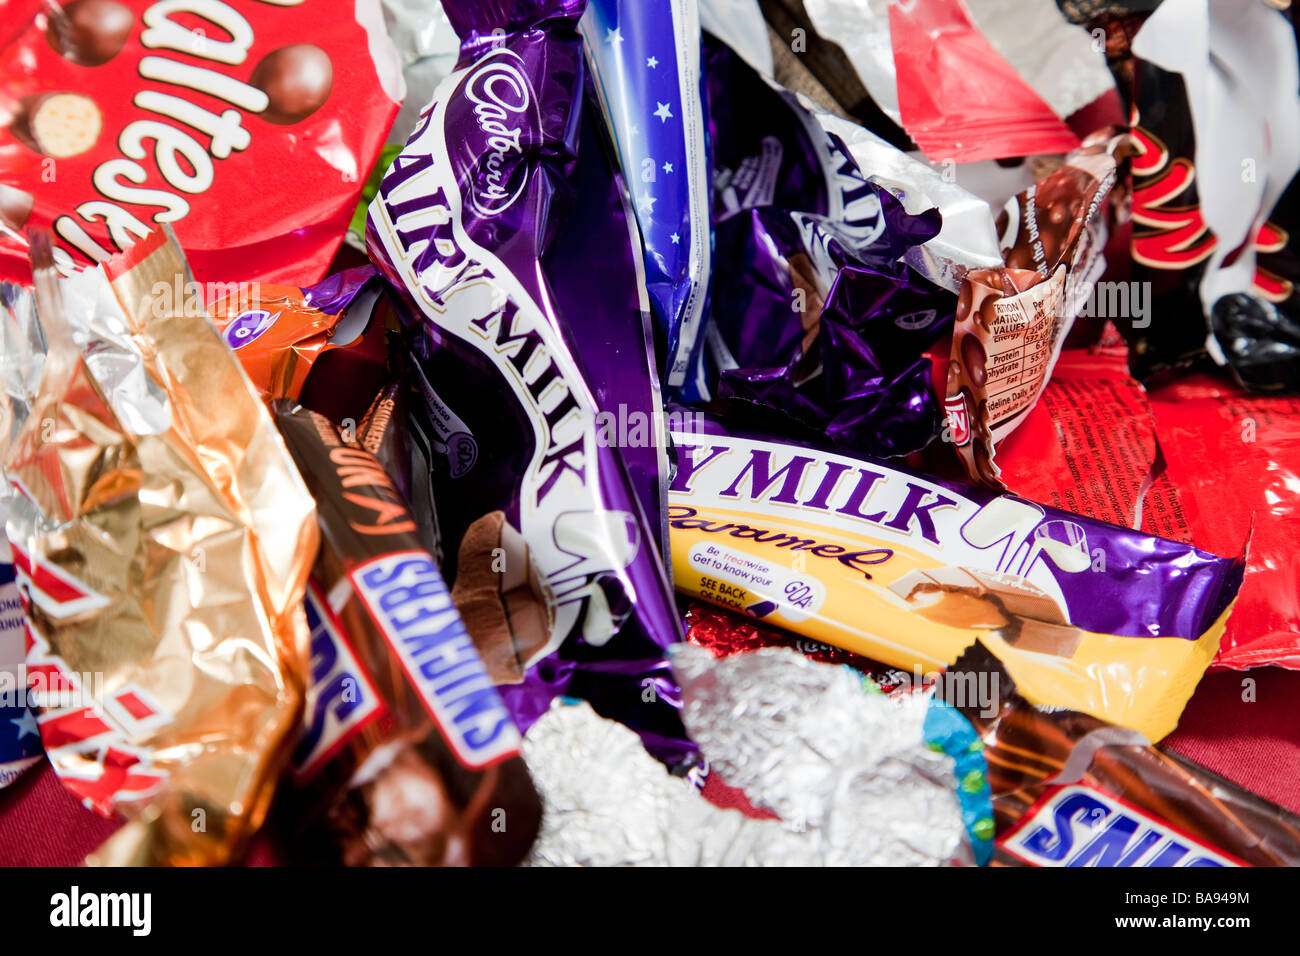 Assorted sweets and chocolate bar wrappers Stock Photo